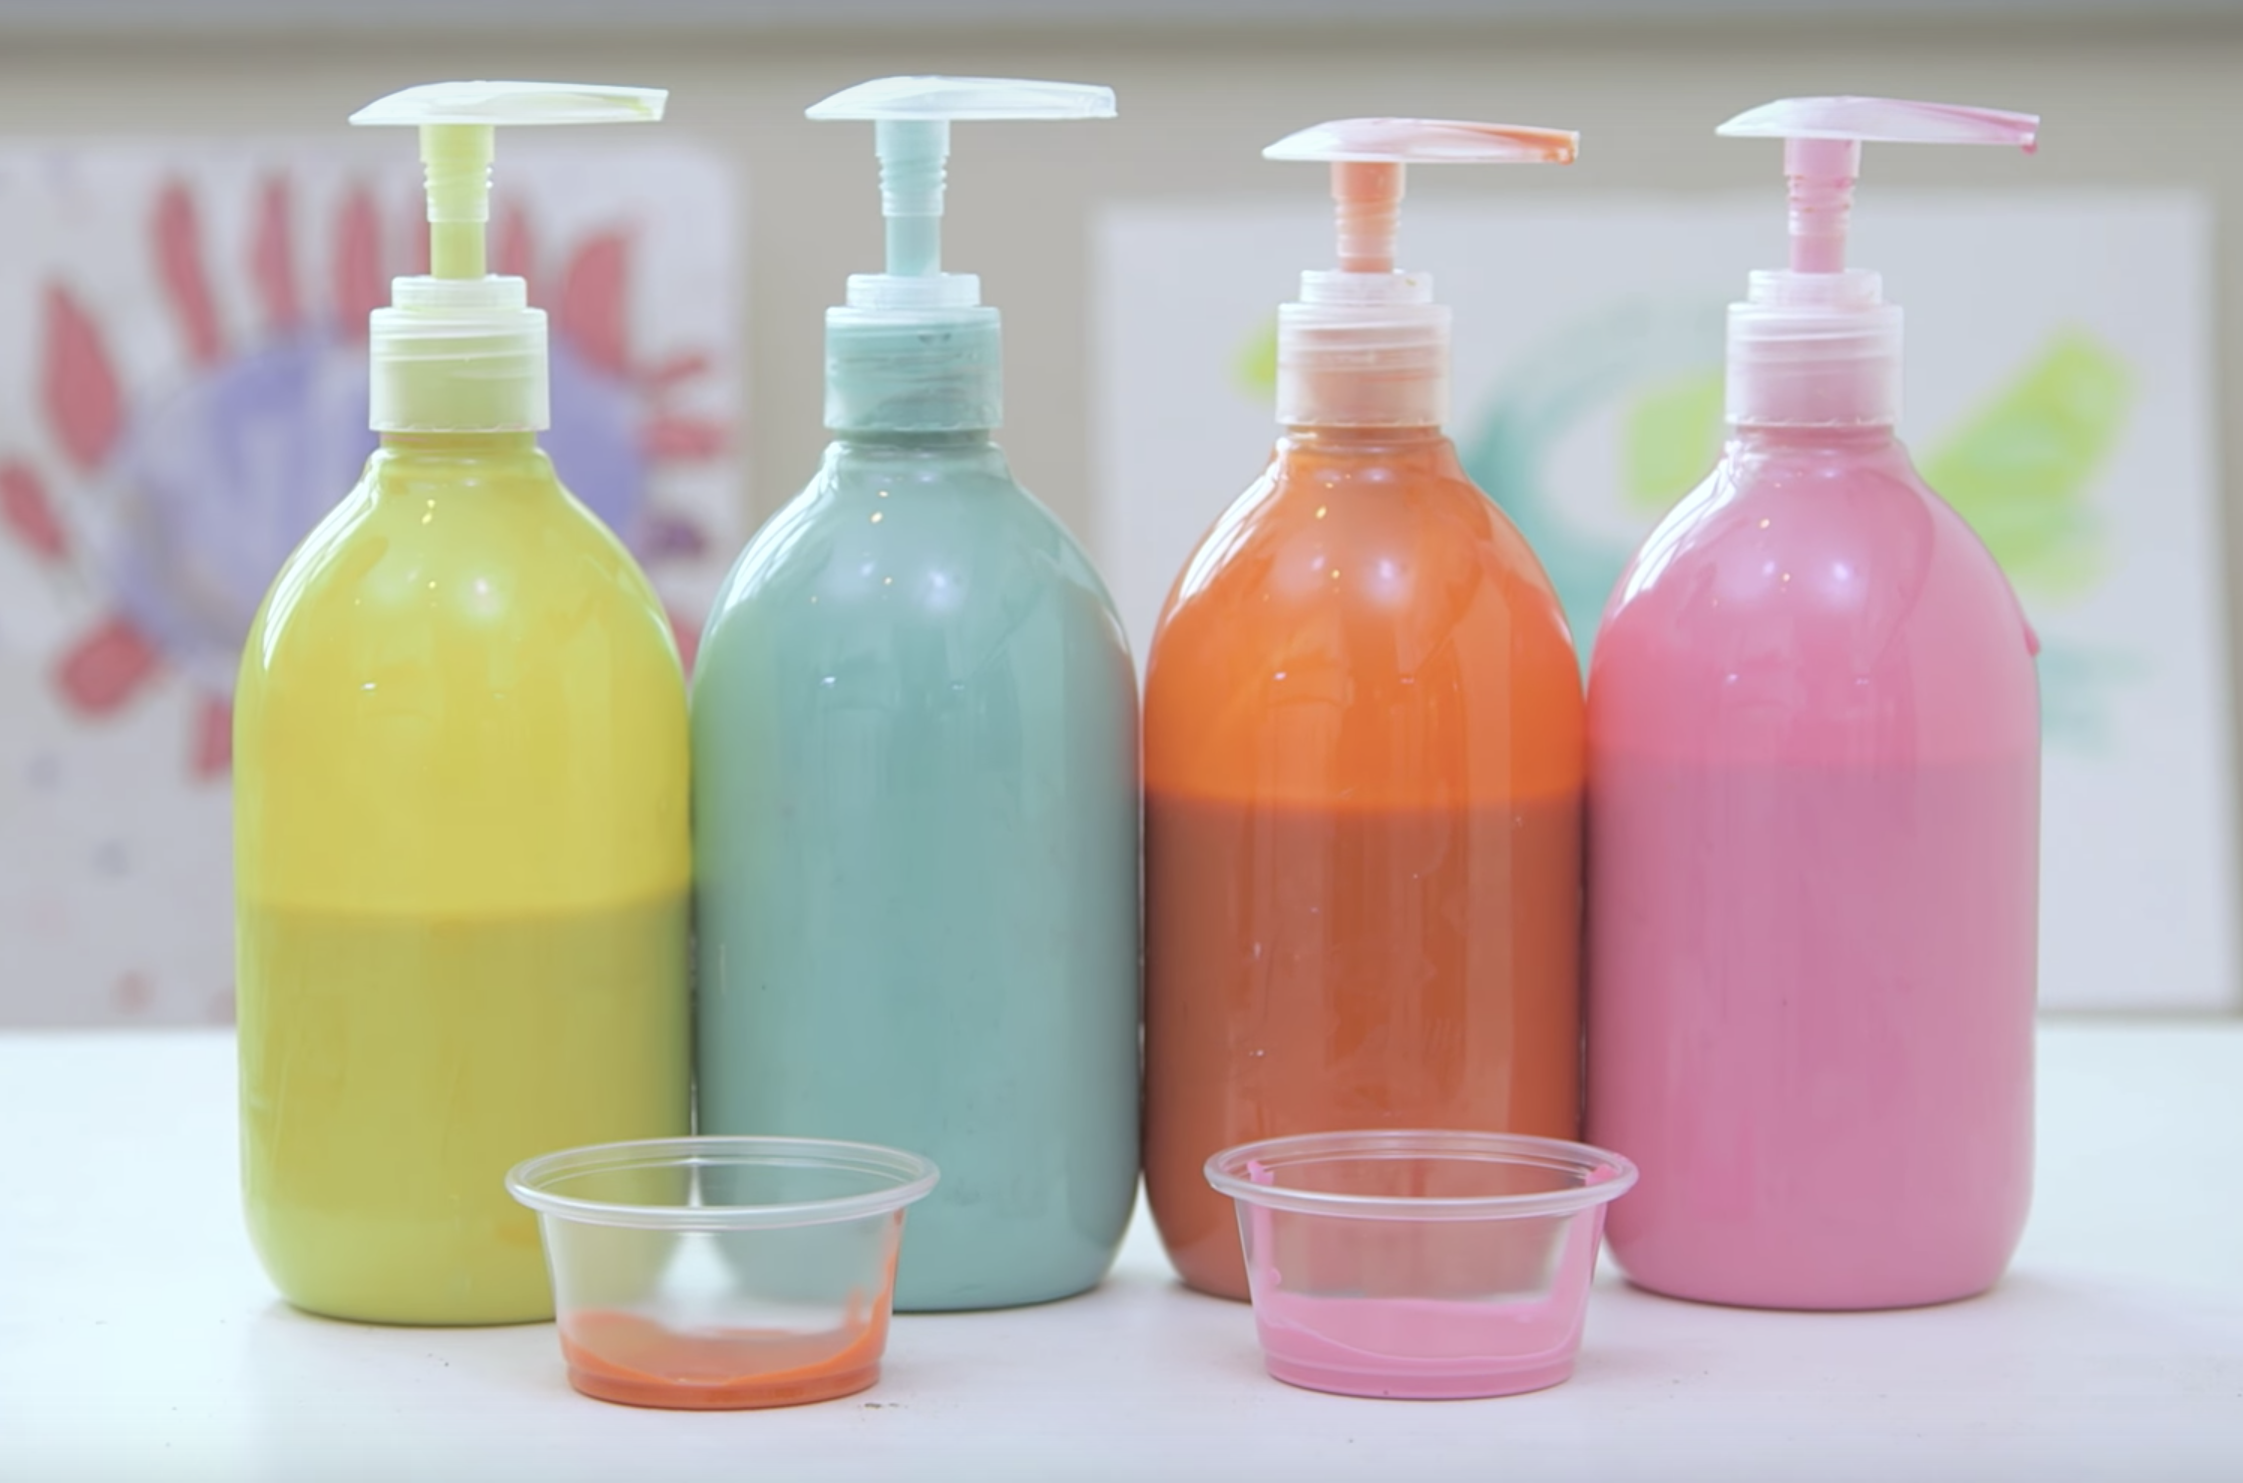 These arts and crafts hacks keep your little one's hands cleaner and your home tidier! You'll be able to make sure everything is in tip-top shape.